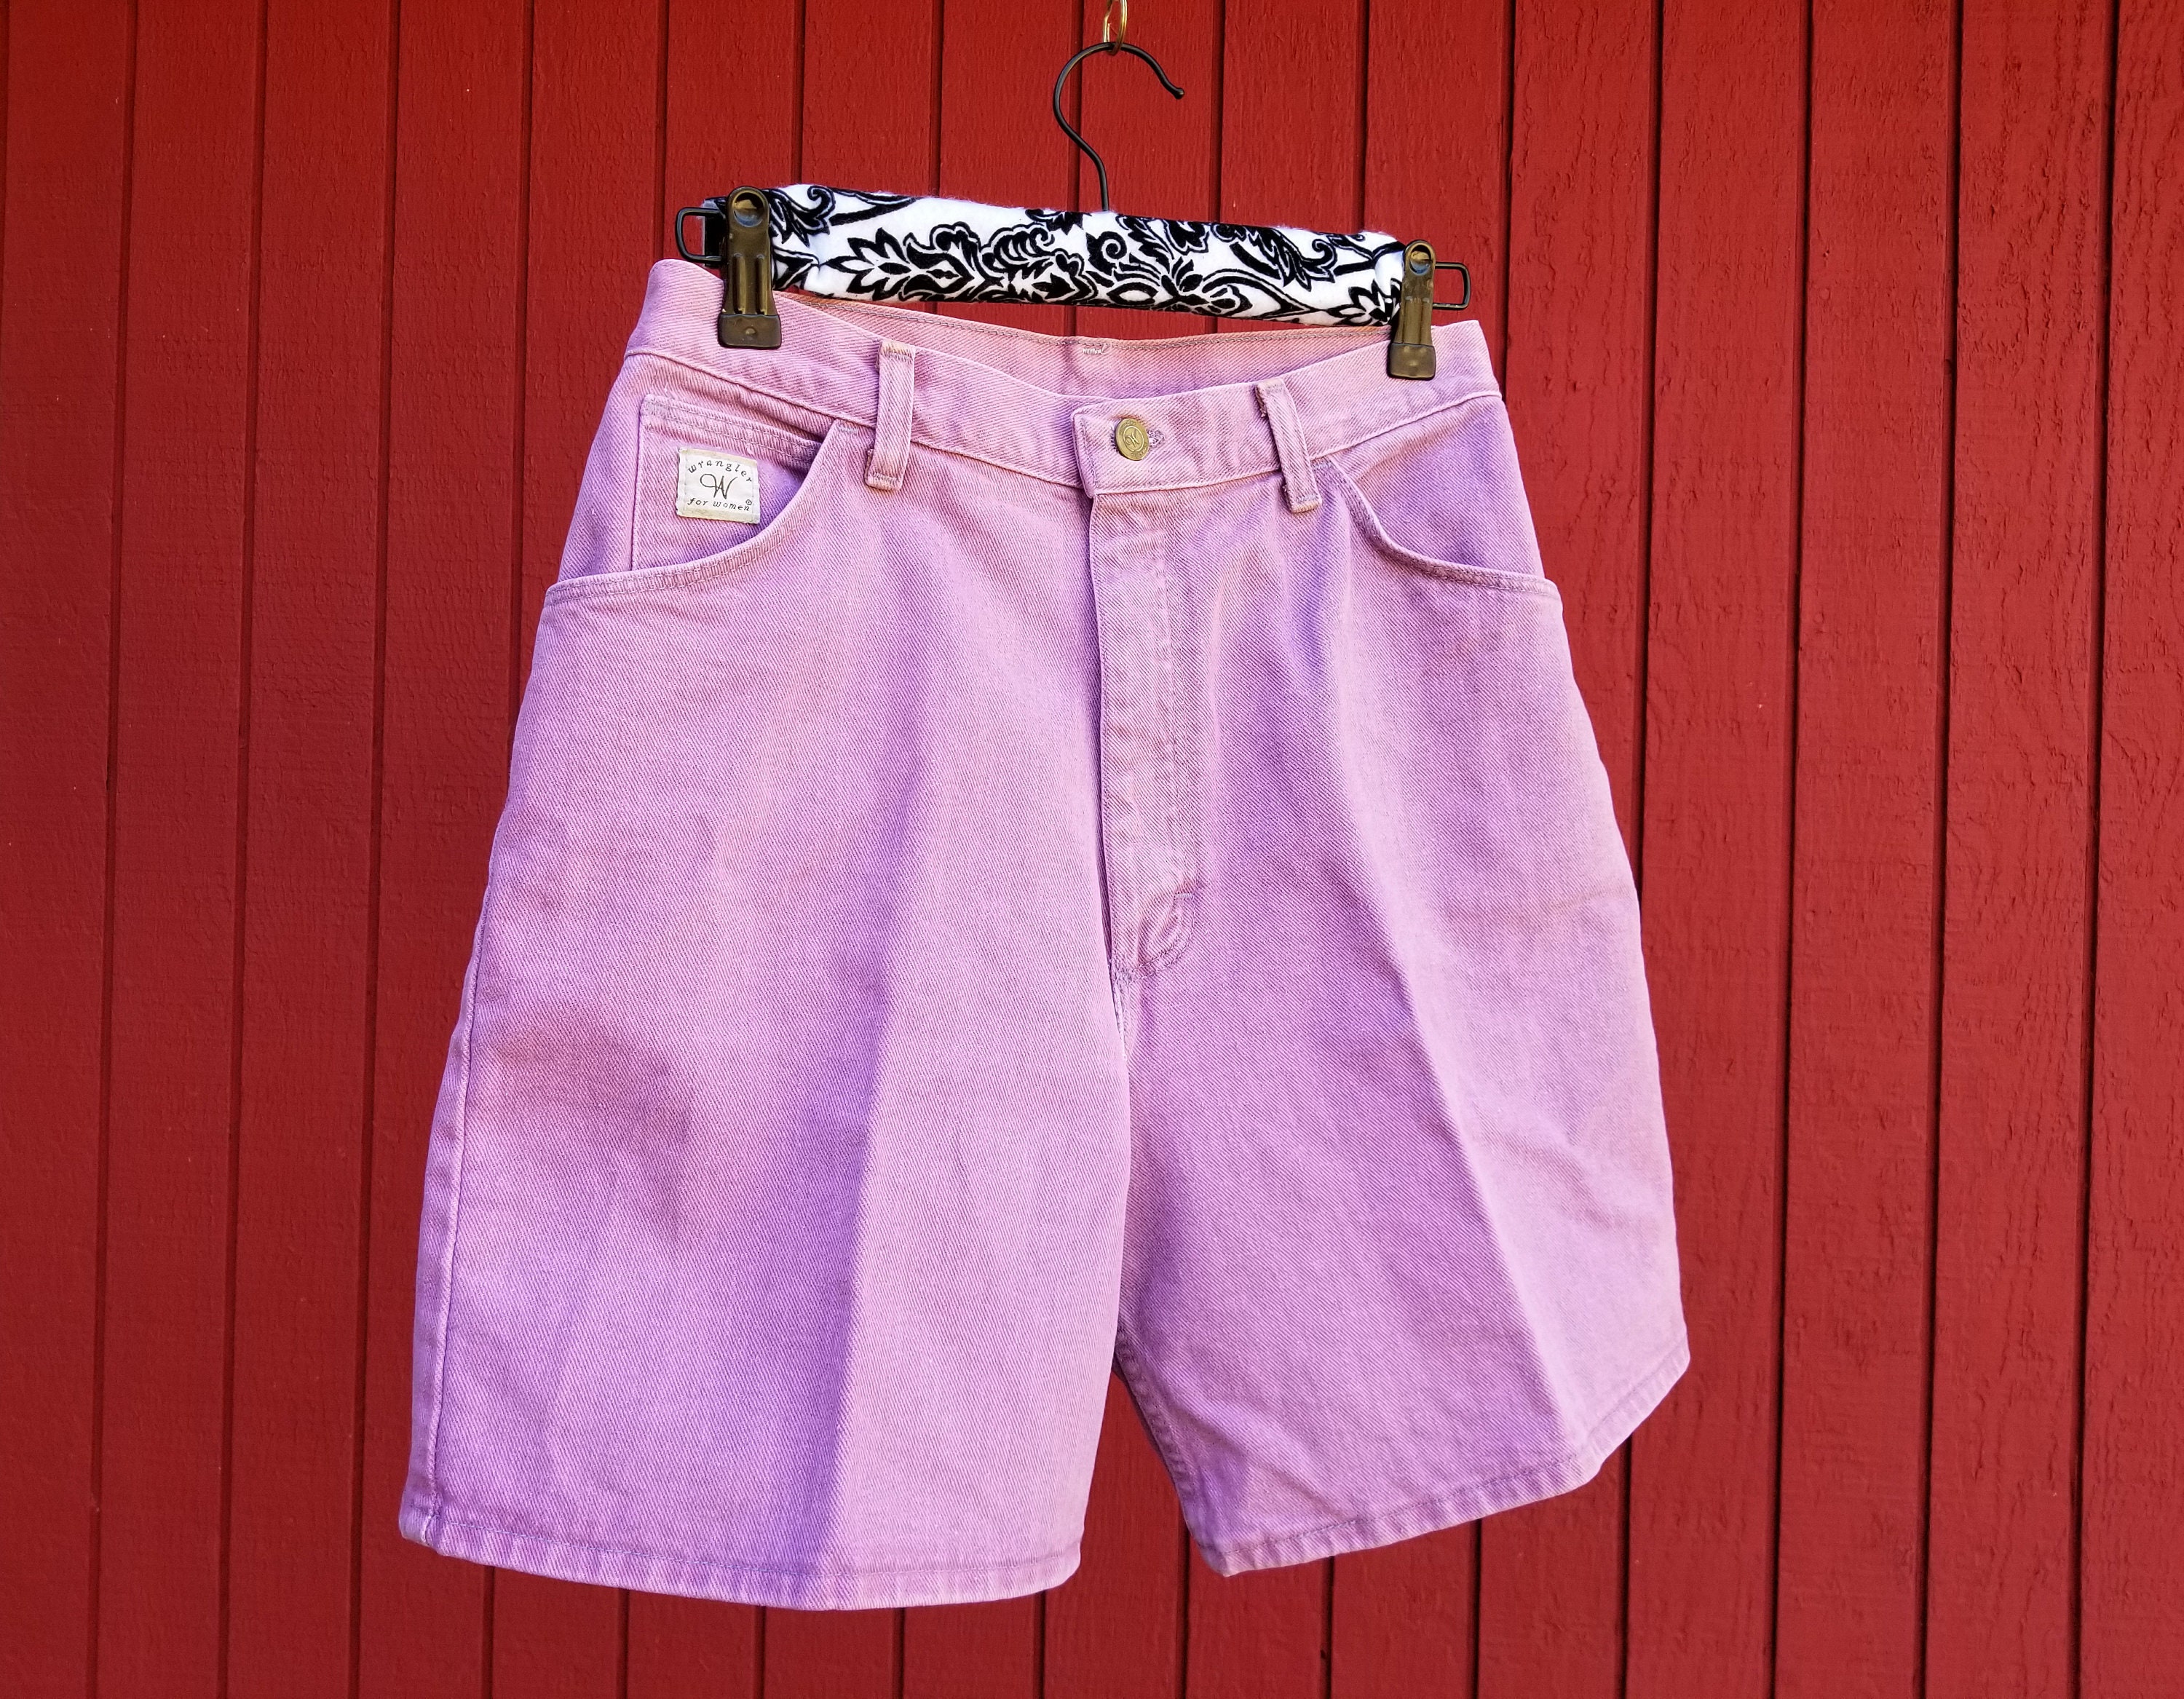 Vintage Wranglers Pink Jean Shorts 1990s Dusty Rose High Waisted Denim ...